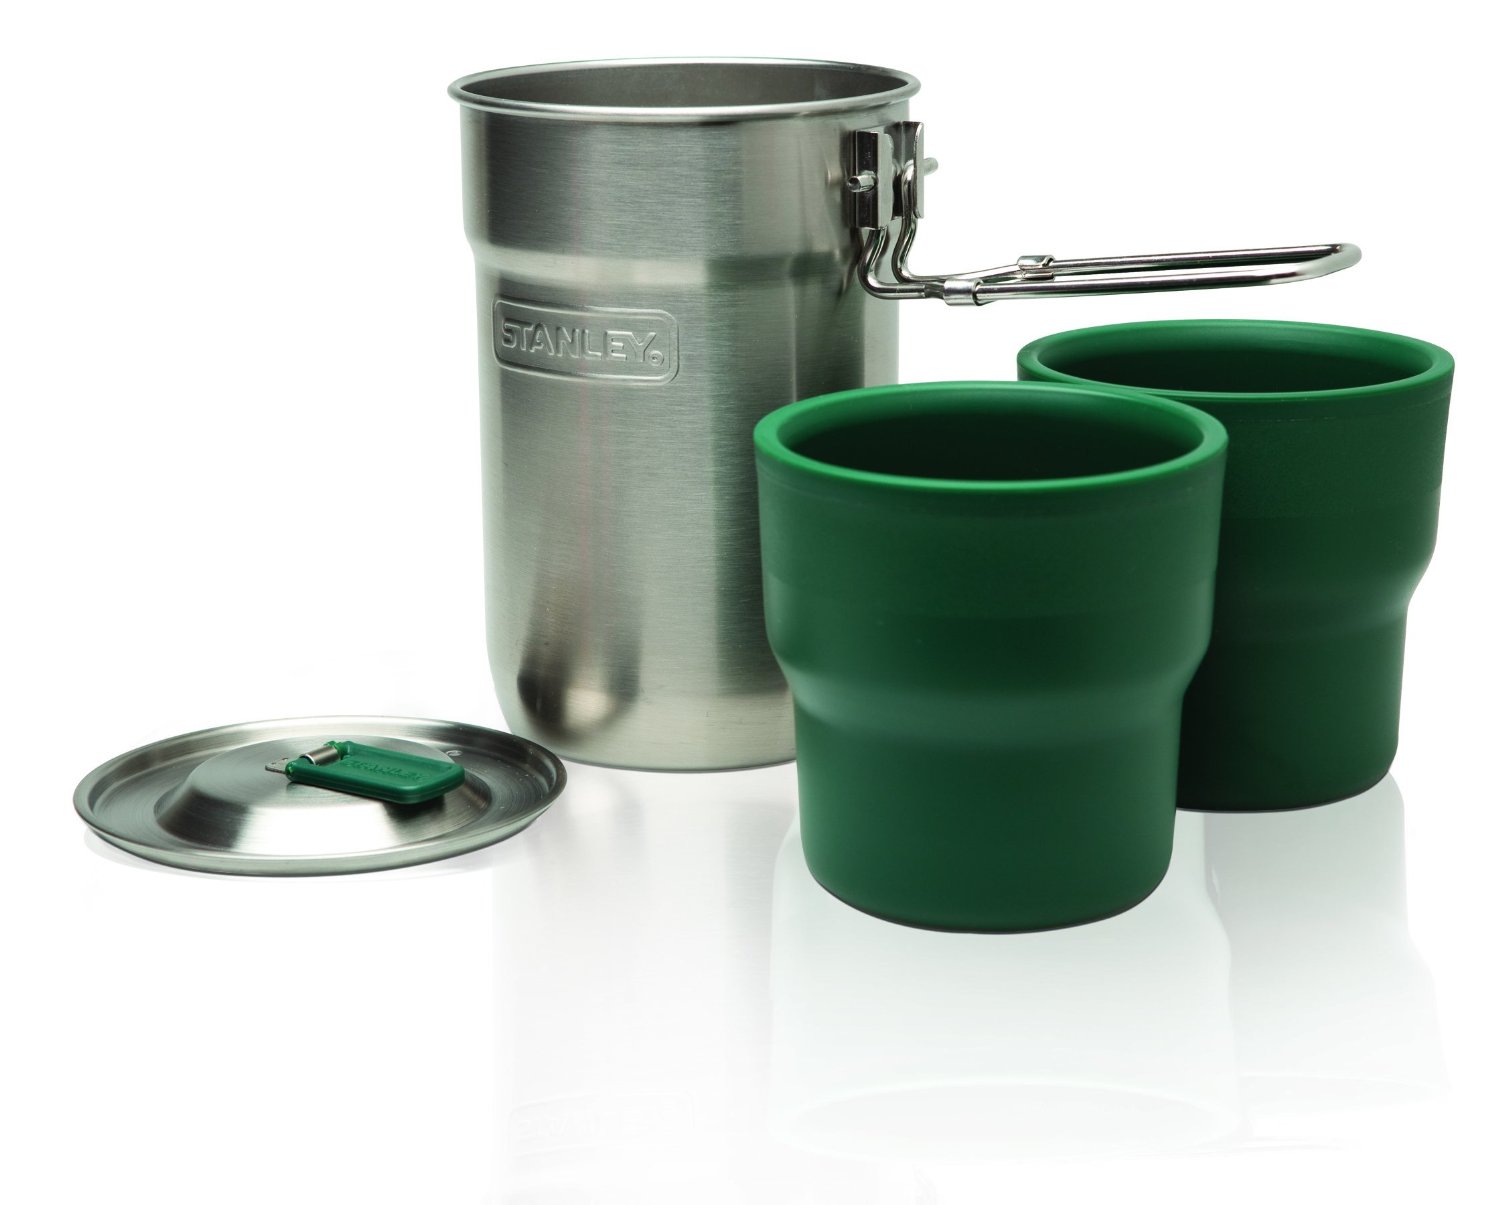 Camp Primitive - Out There, Somewhere: Stanley Camp Cook & Cup Set - Review